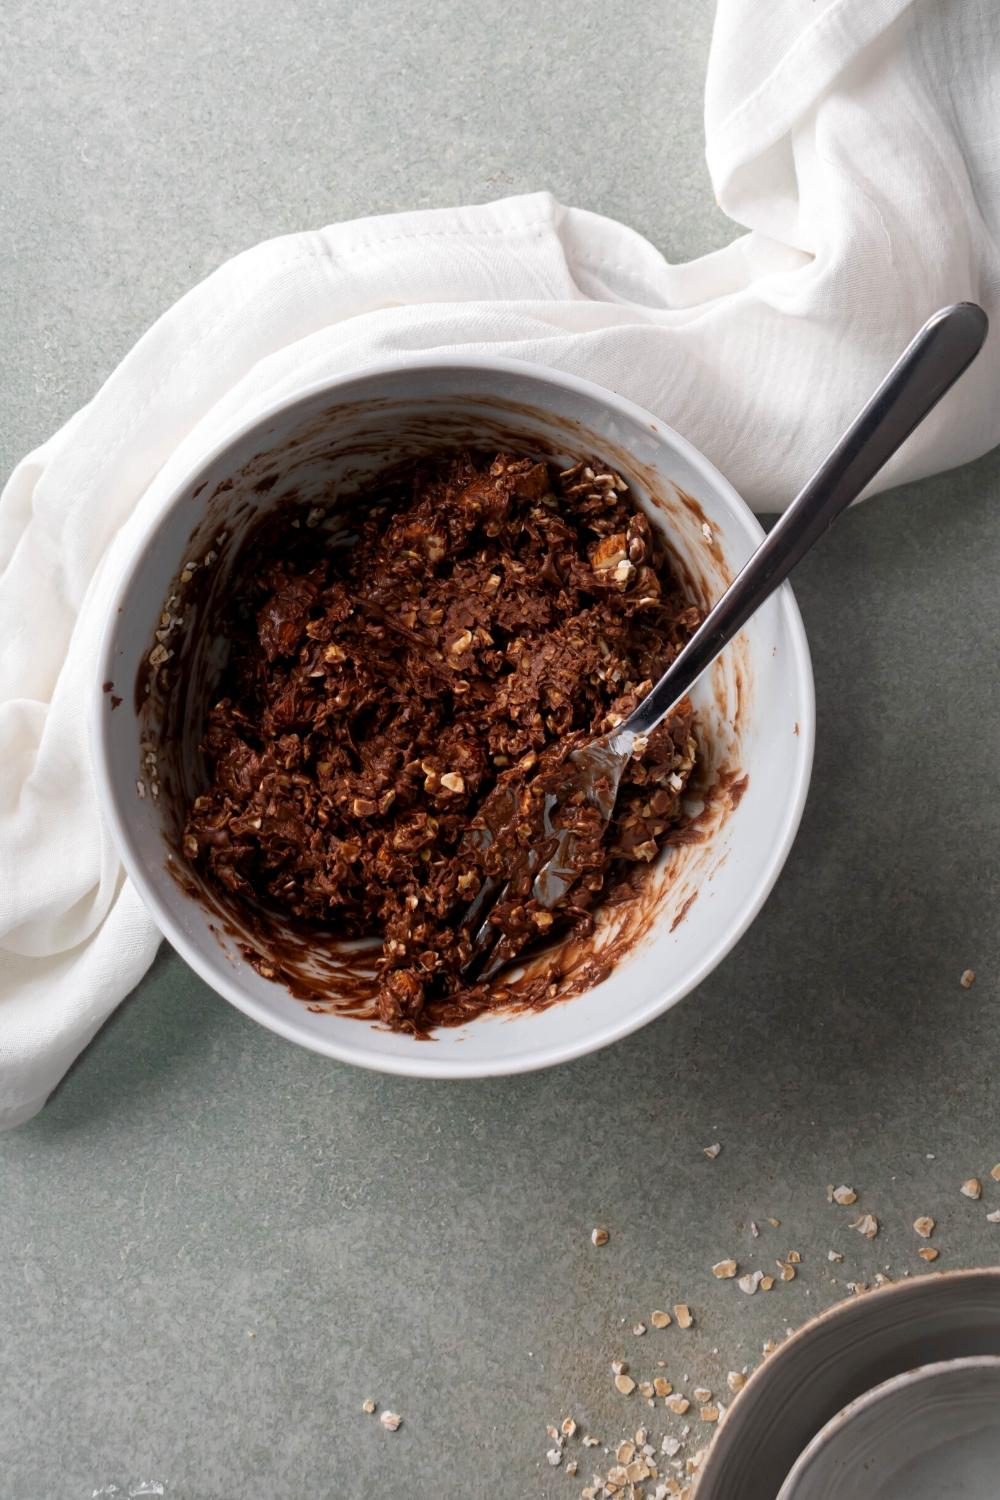 A white bowl filled with chocolate oatmeal no bake cookie. A fork is submerged in the mixture and the bowl is on a grey counter.